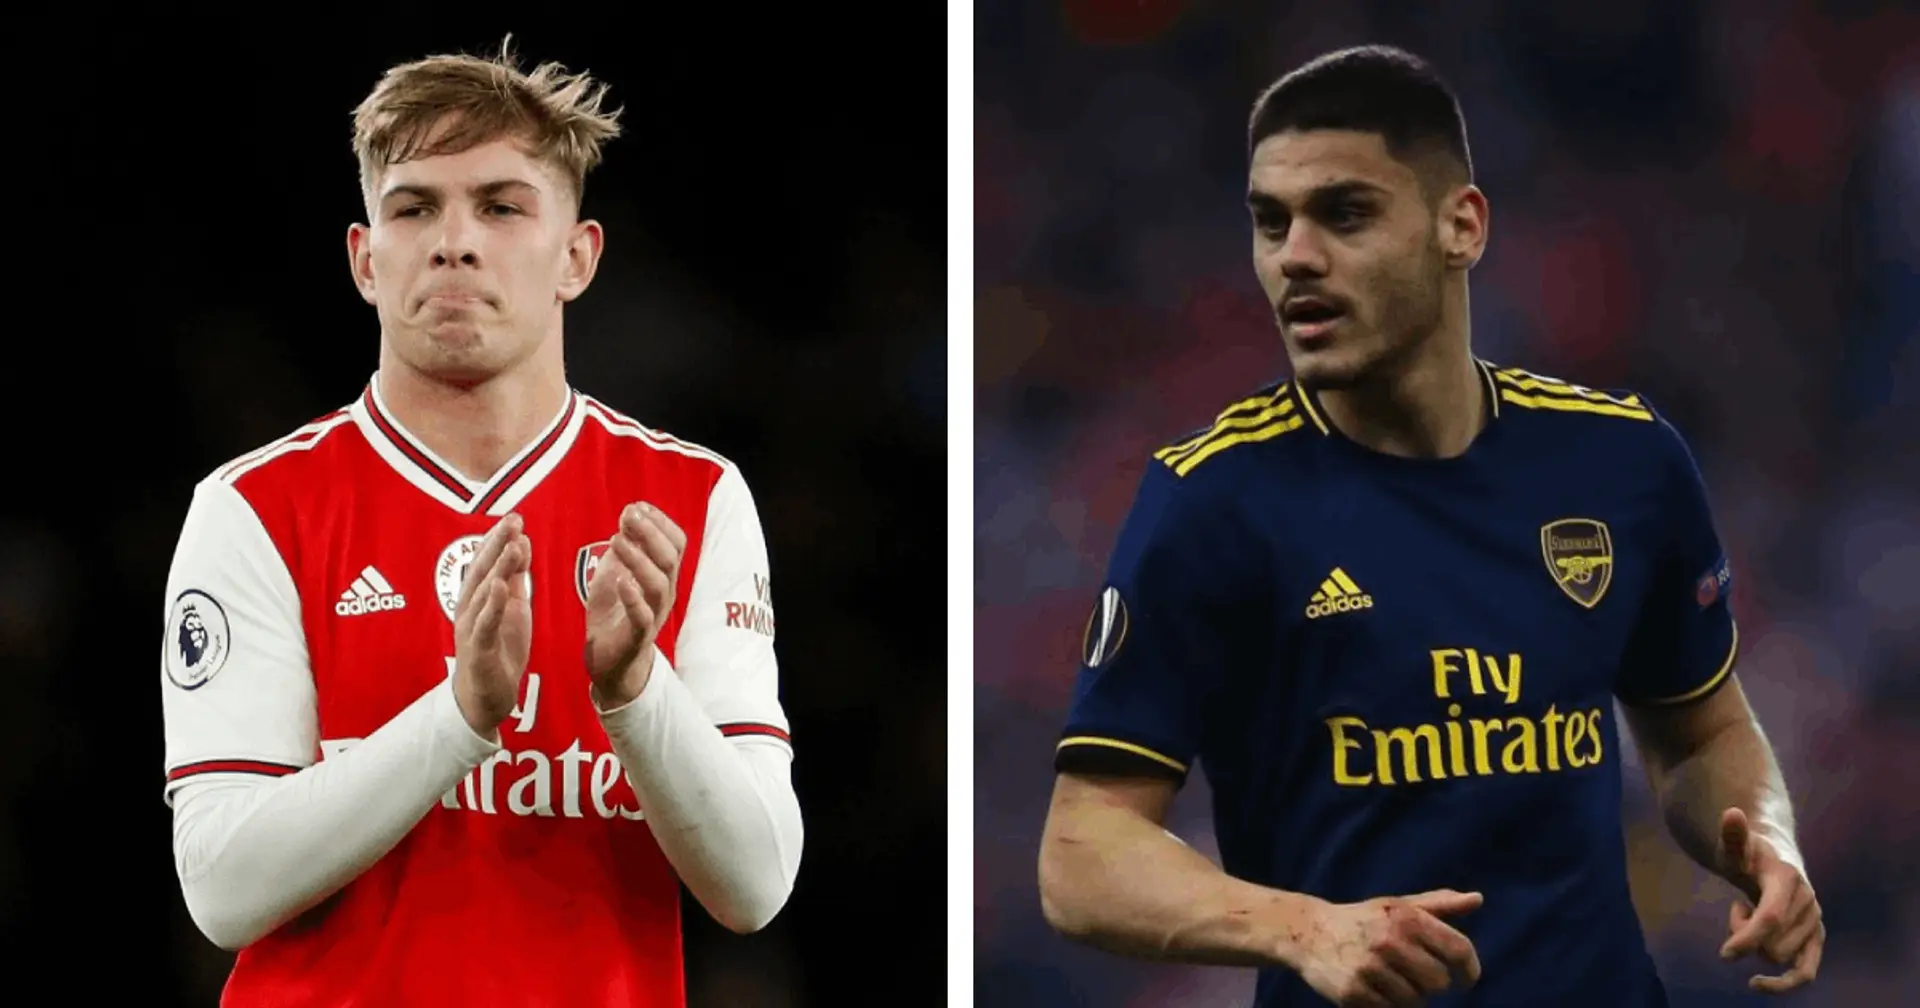 Arsenal reject Villa's bid for Smith Rowe & 6 other big stories you might have missed